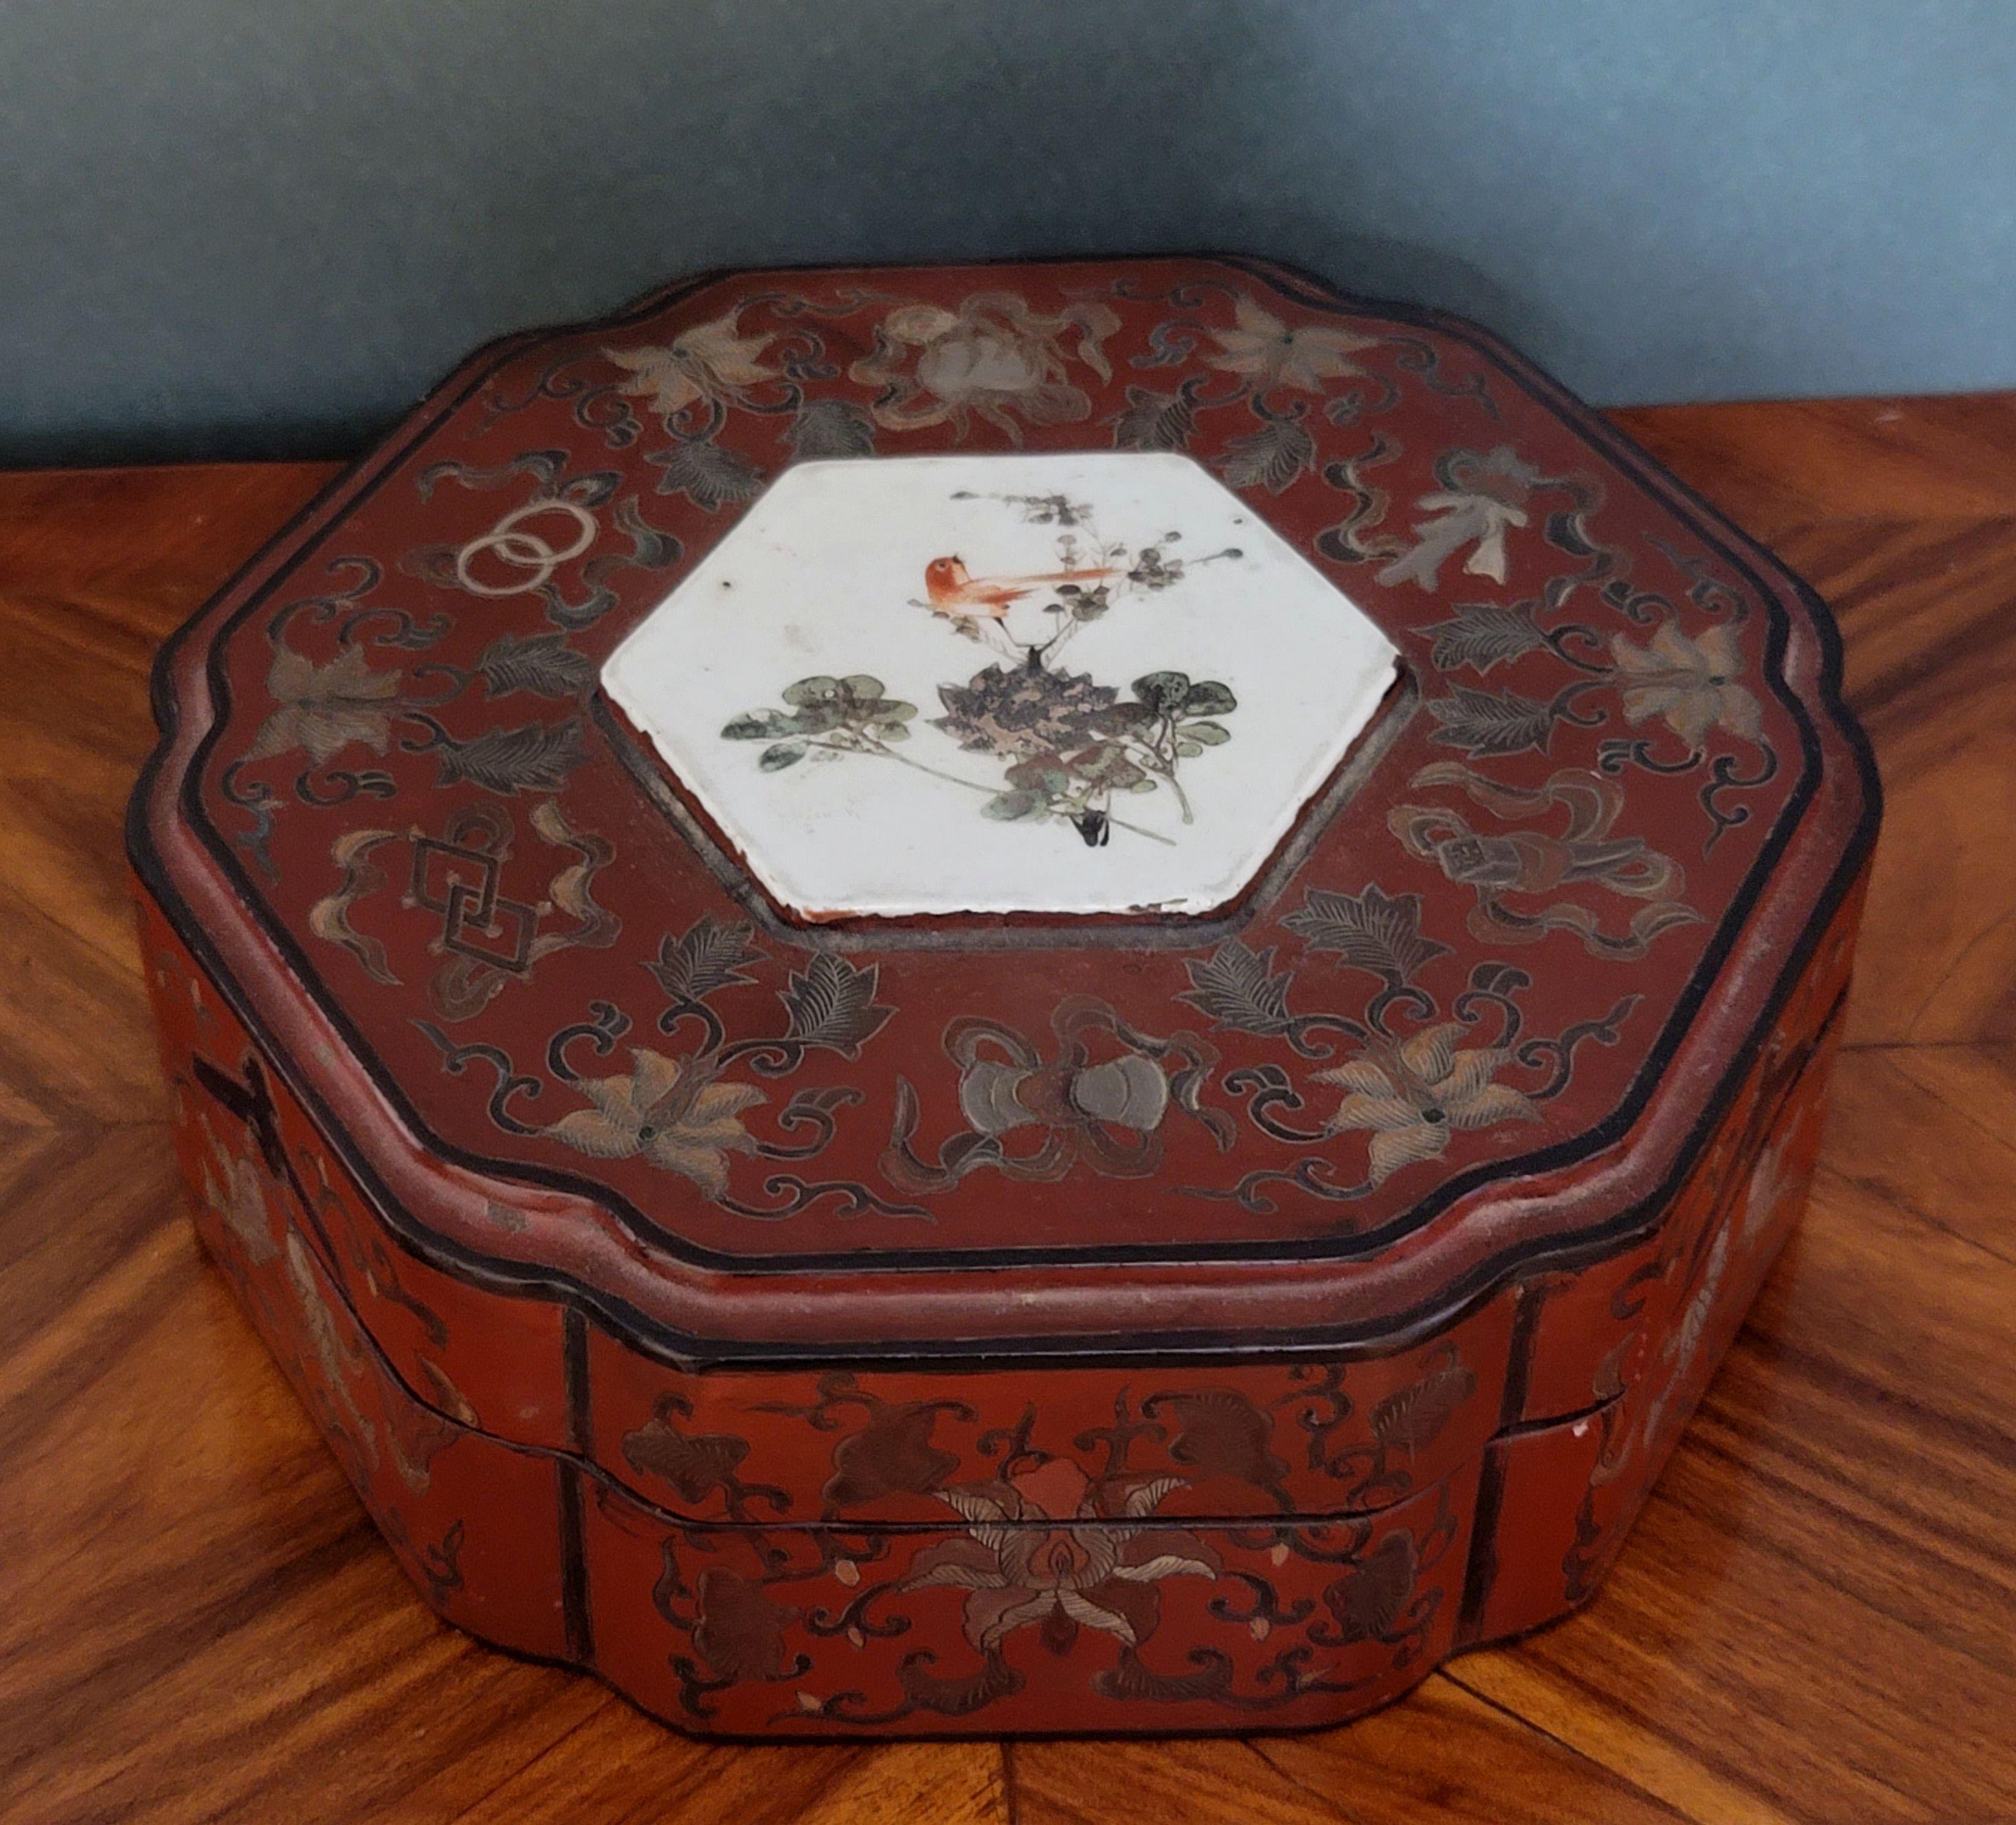 A large Chinese gilt lacquered box with porcelain medallion in the center top depicting floral pattern and bird.

 